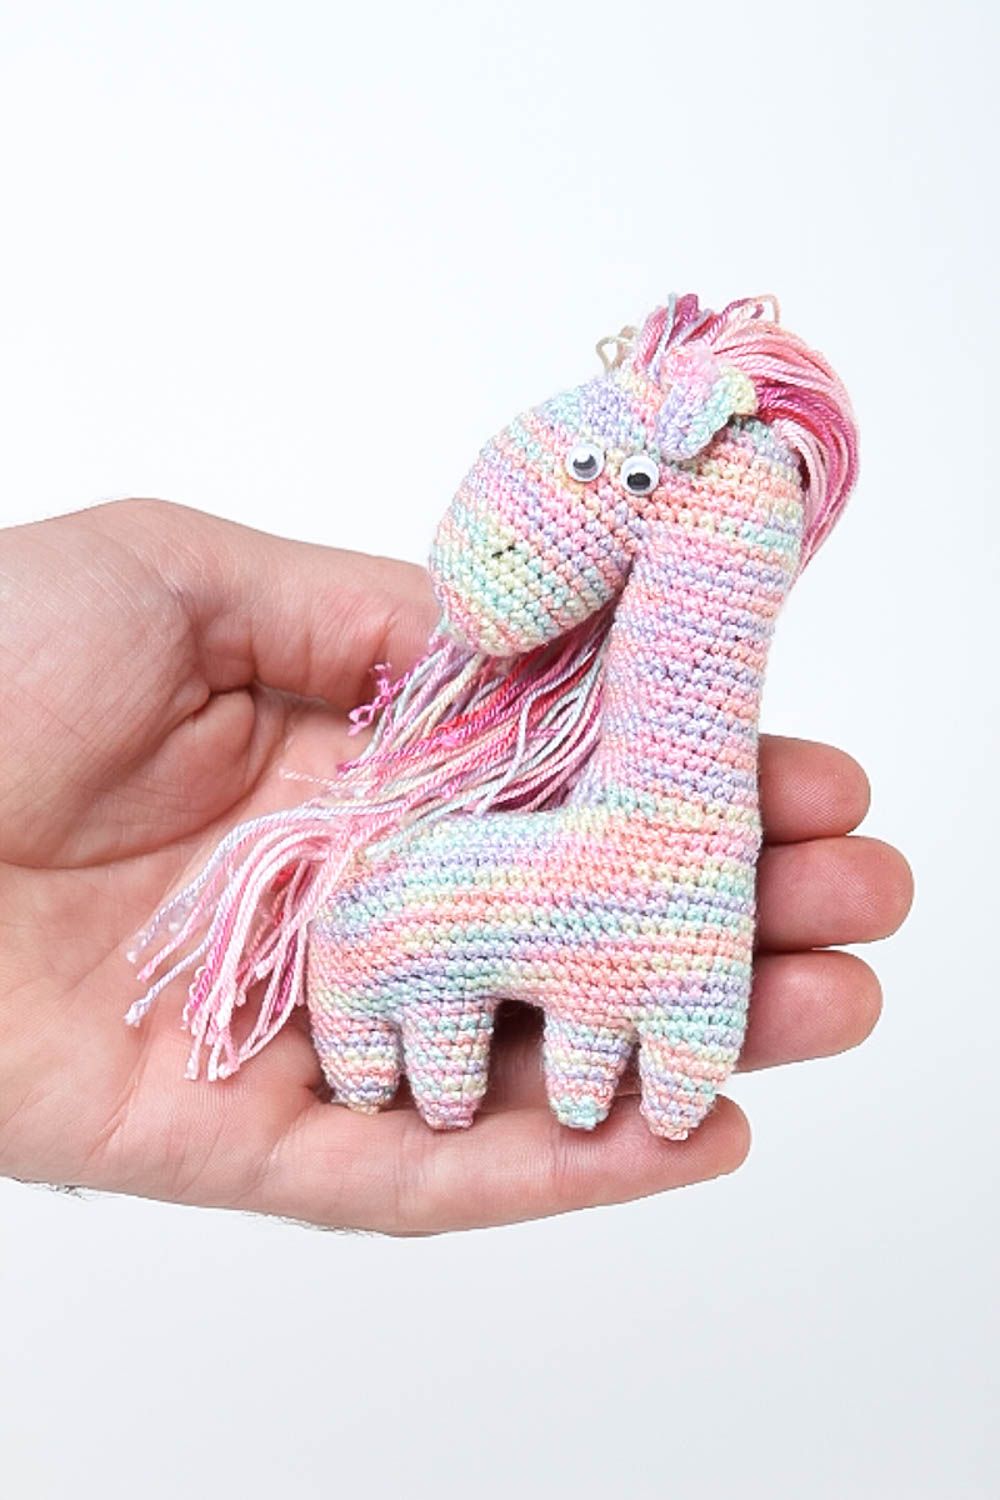 Handmade beautiful designer toy crocheted horse toy present for kids soft toy photo 5